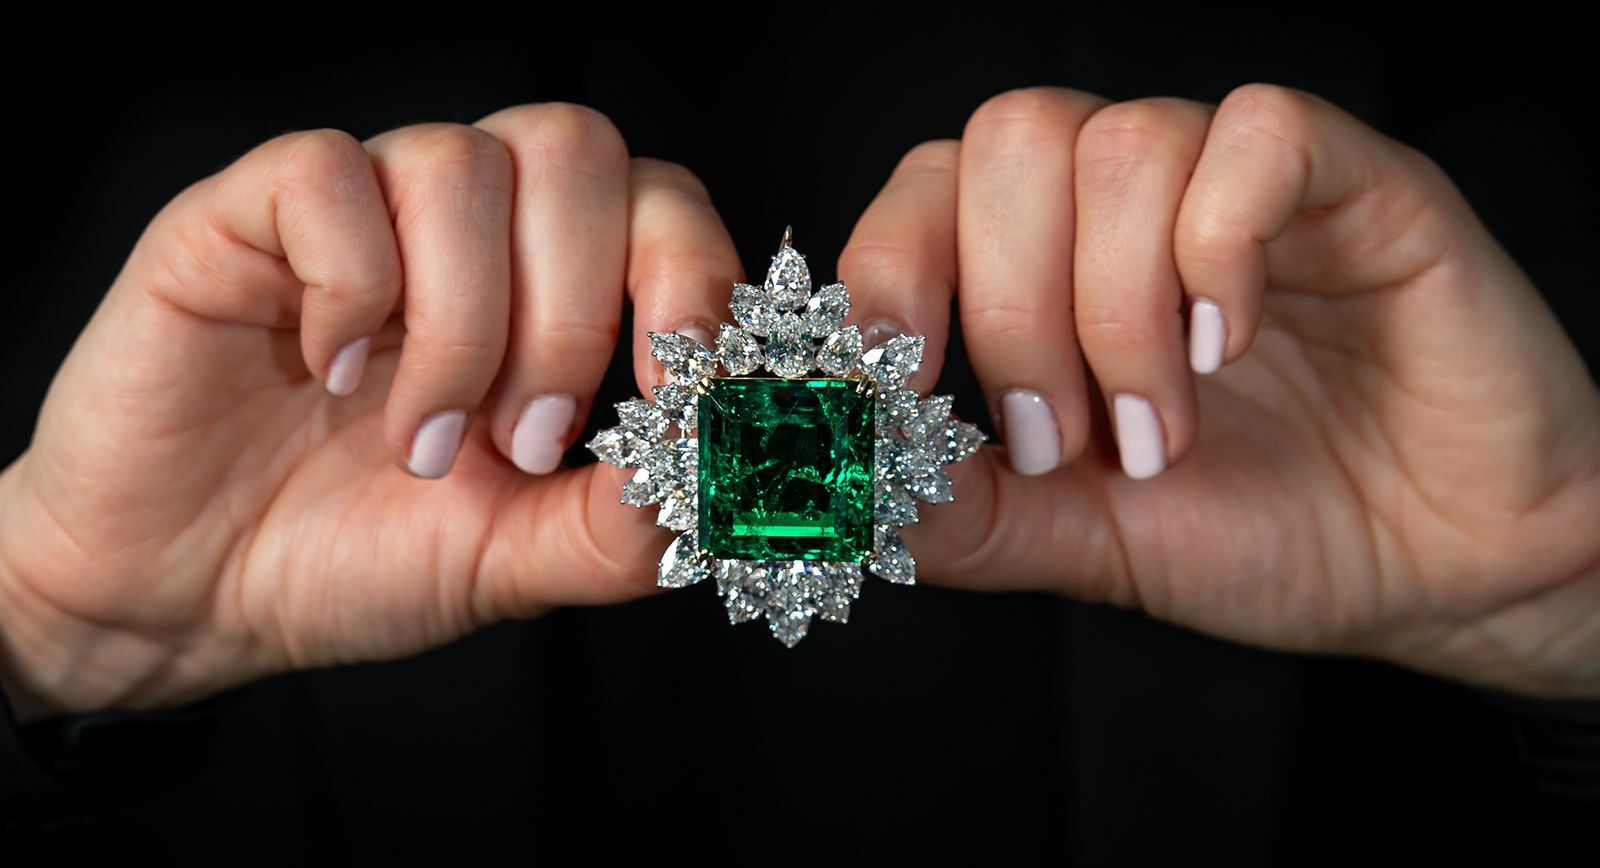 Sotheby’s Magnificent Jewels and Noble Jewels auction Geneva 2021 ‘Big Rocks’ 80.45 carat step-cut Colombian emerald and diamond brooch 